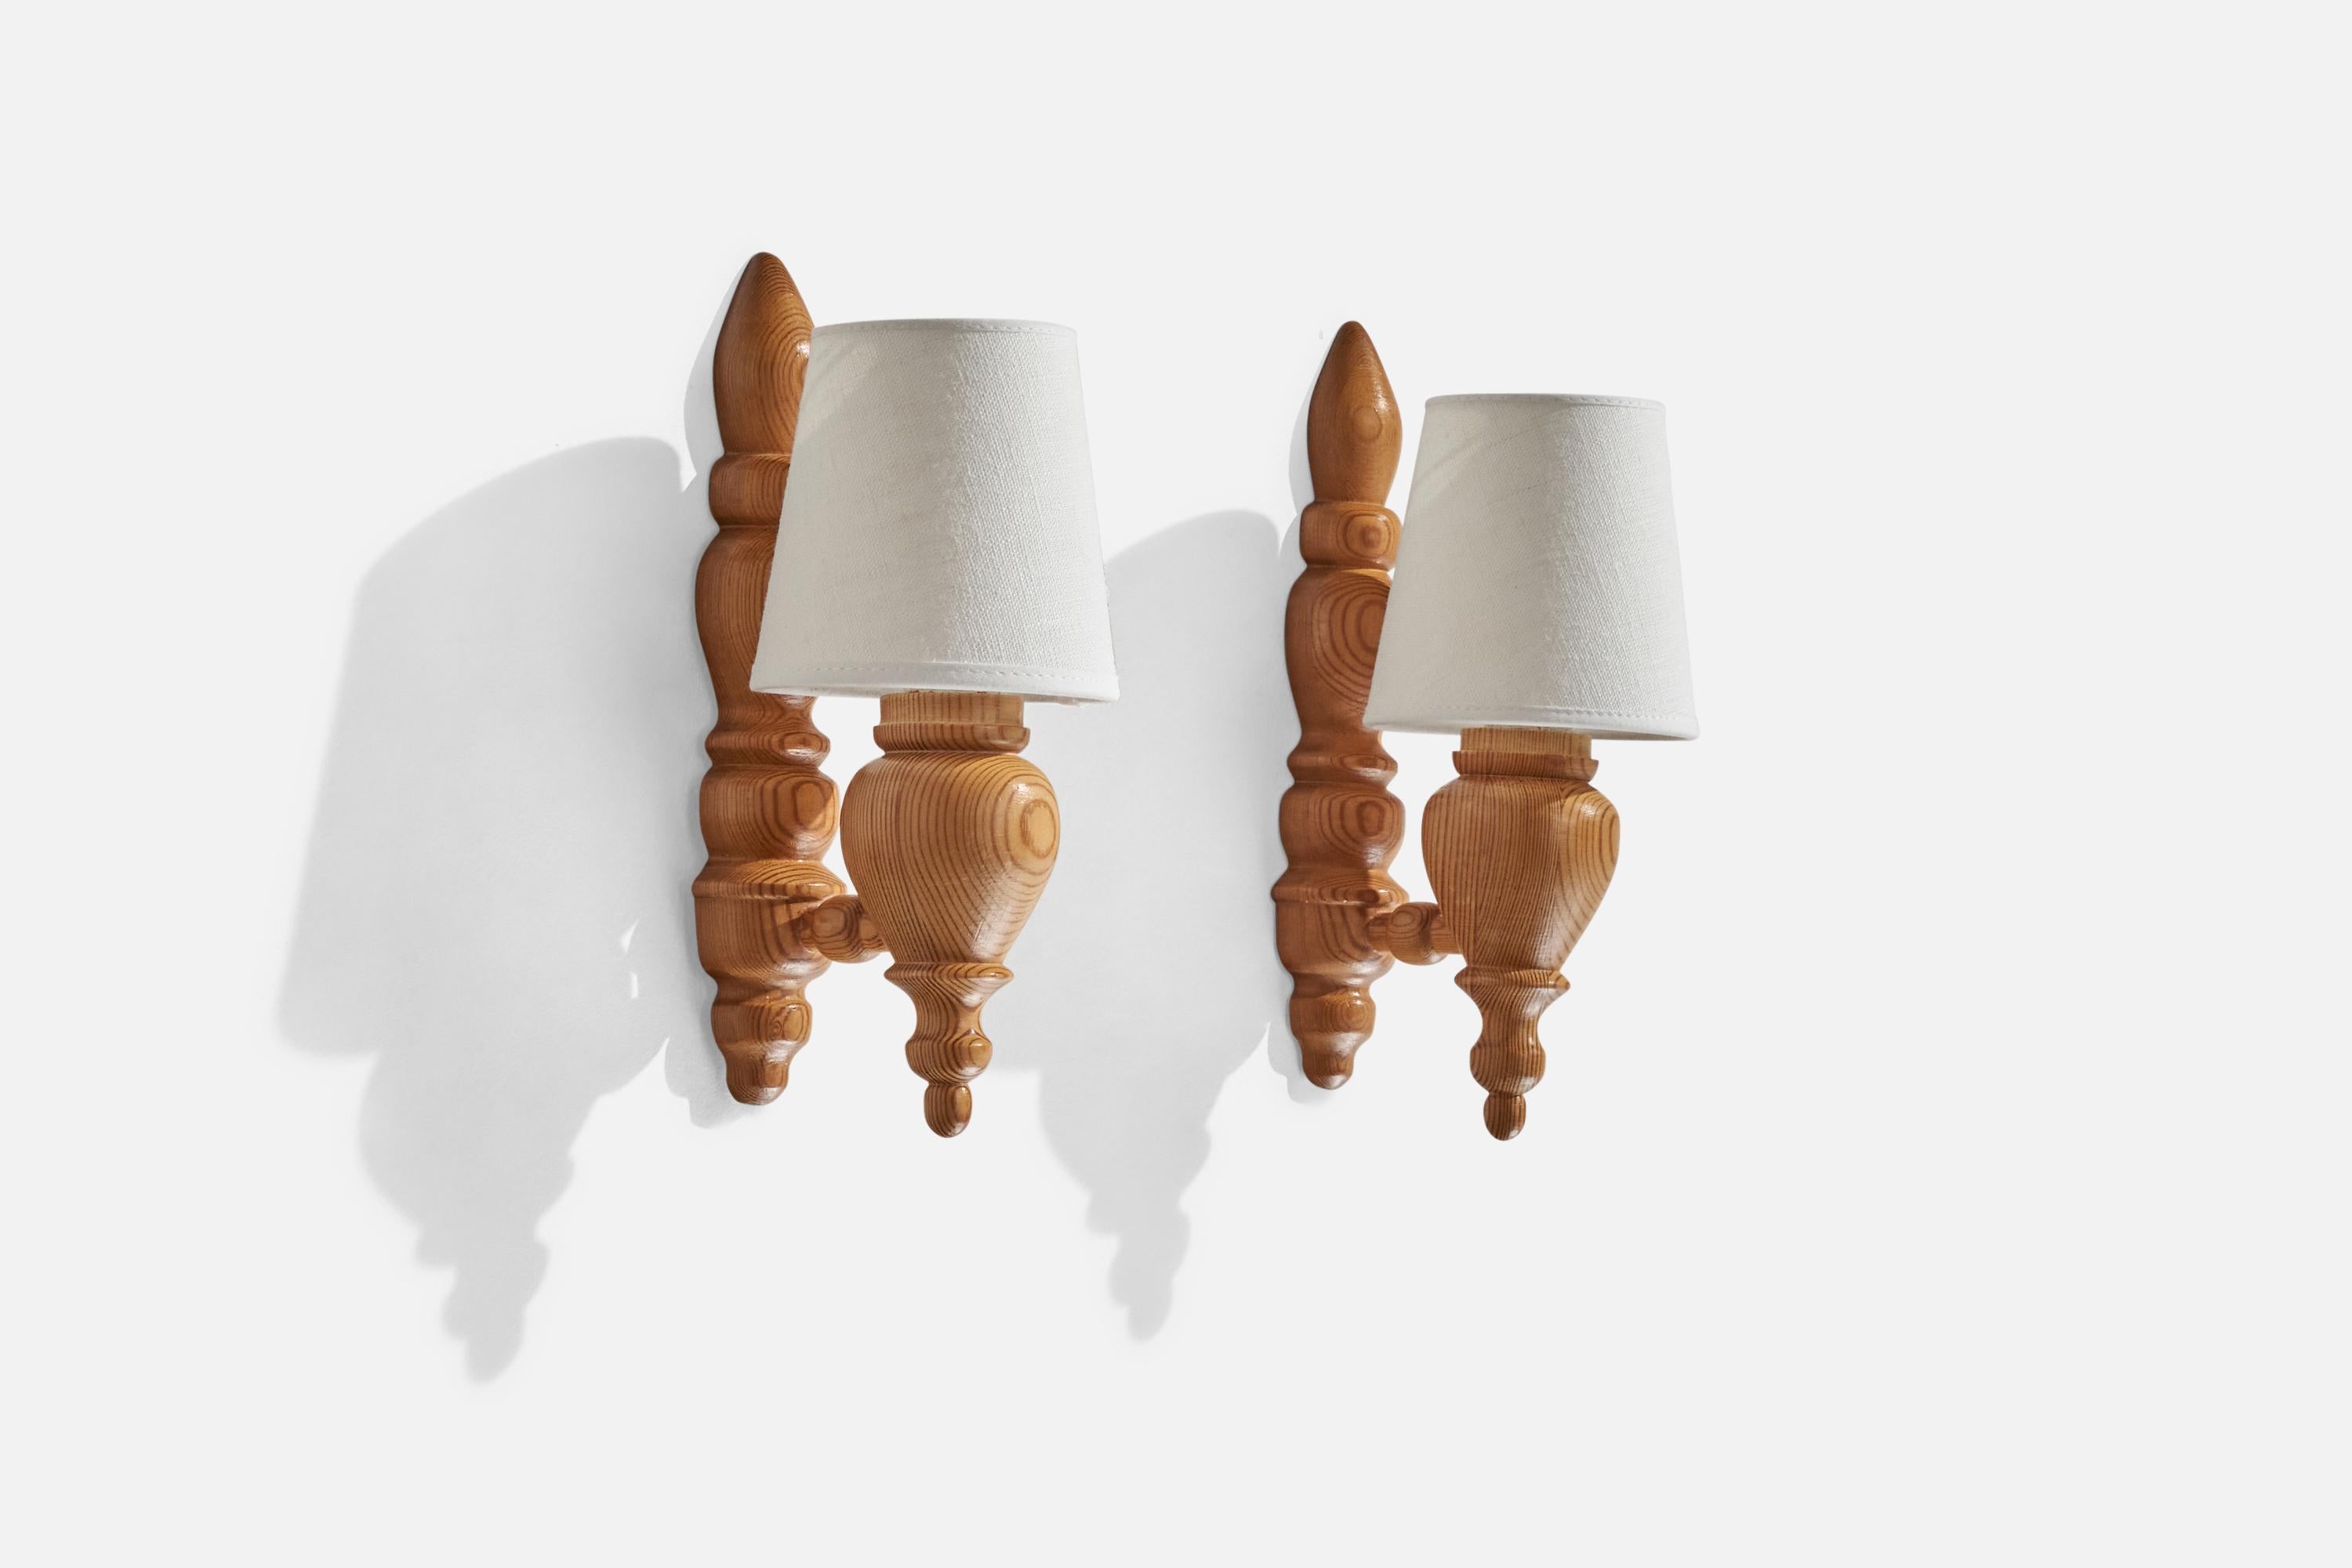 A pair of pine and white fabric wall lights designed and produced in Sweden, c. 1970s.

Overall Dimensions (inches): 9.5” H x 3.75” W x 4.875” D
Back Plate Dimensions (inches):N/A
Bulb Specifications: E-14 Bulb
Number of Sockets: 2
All lighting will